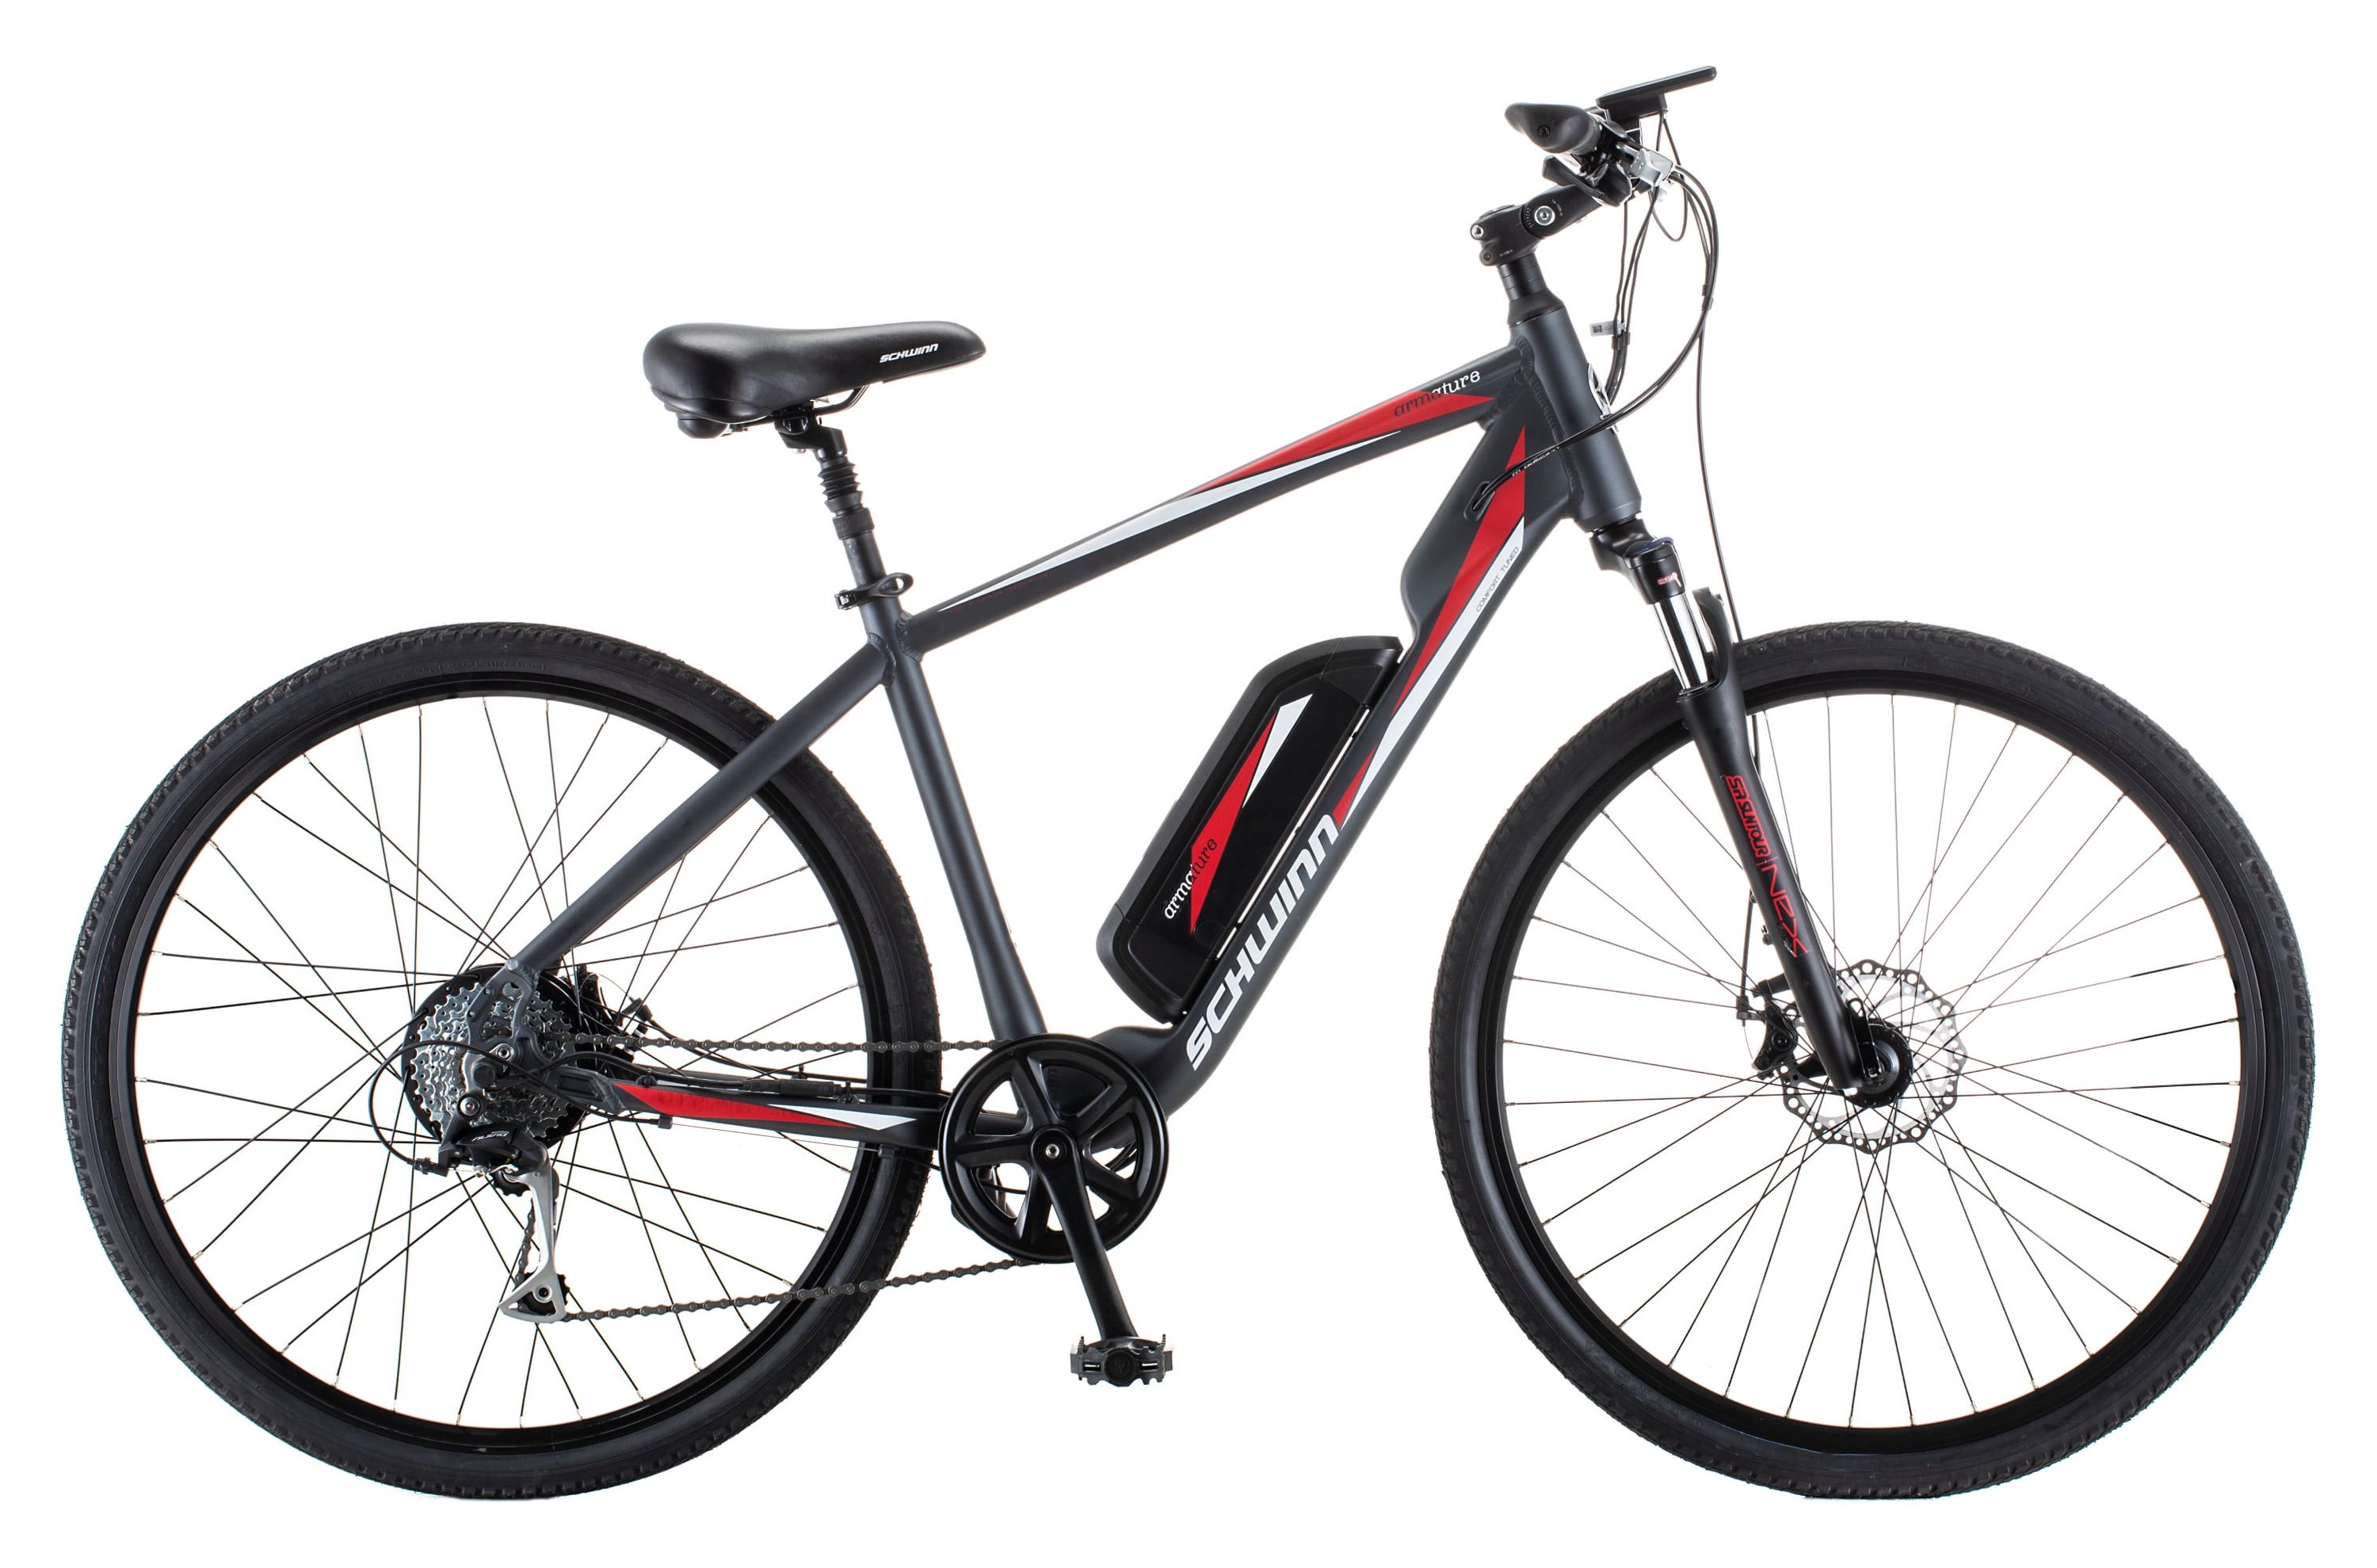 Schwinn 700c Armature Unisex Electric Bike, Black and Red Ebike, Small Frame for Adults - image 1 of 9